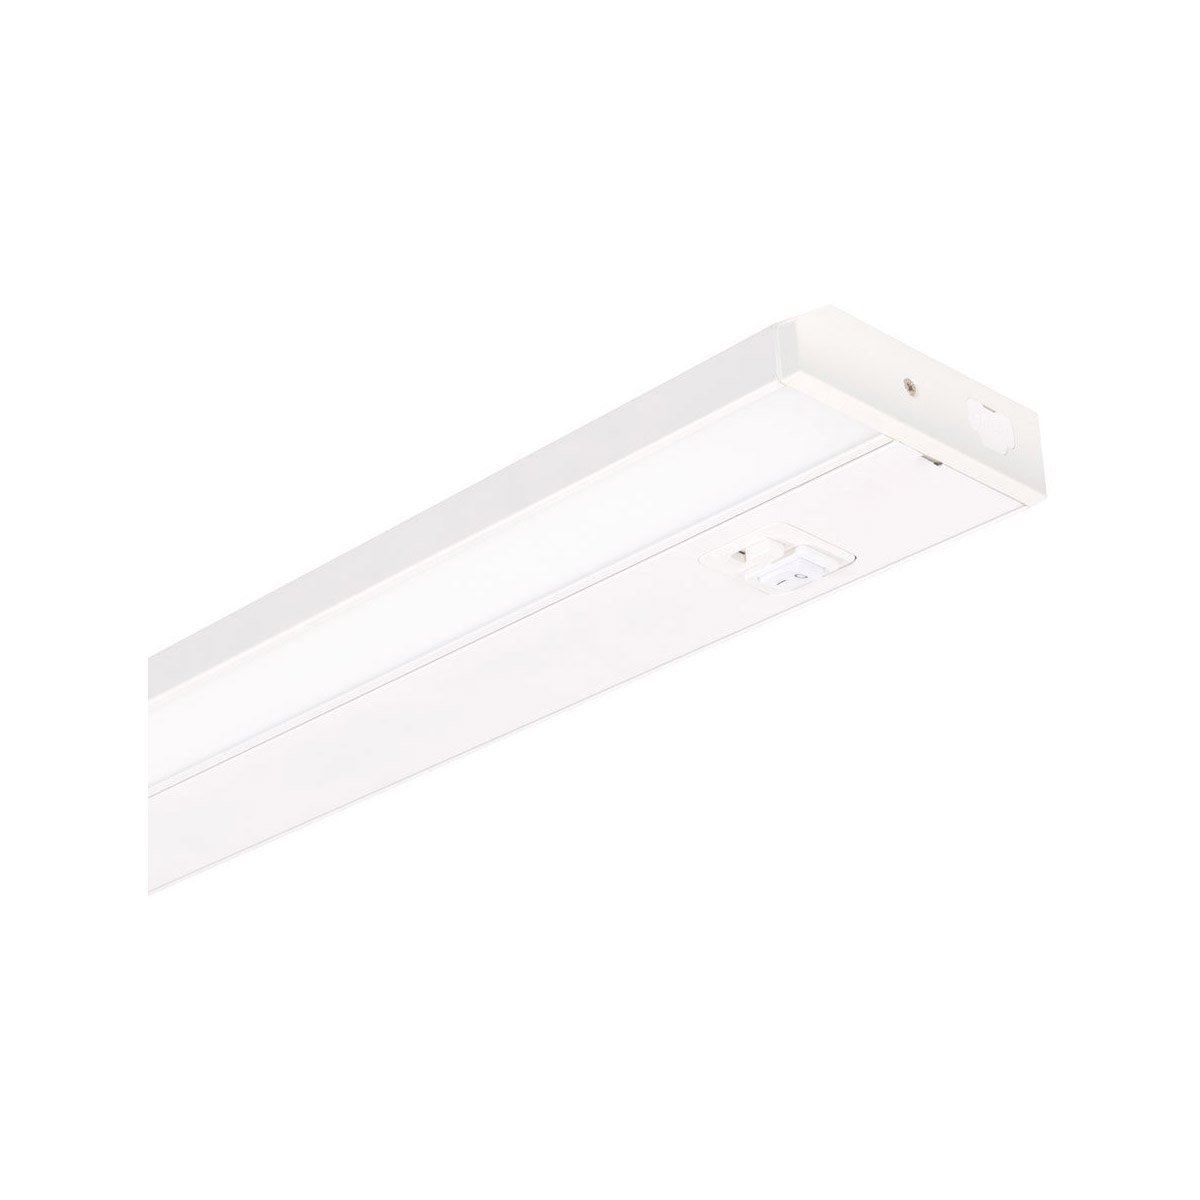 Picture of Jesco SG150-16-SWC-WH 16 in. 10W Shallow Profile LED Linkable Undercabinet Light with Adjustable Color Temperature, White